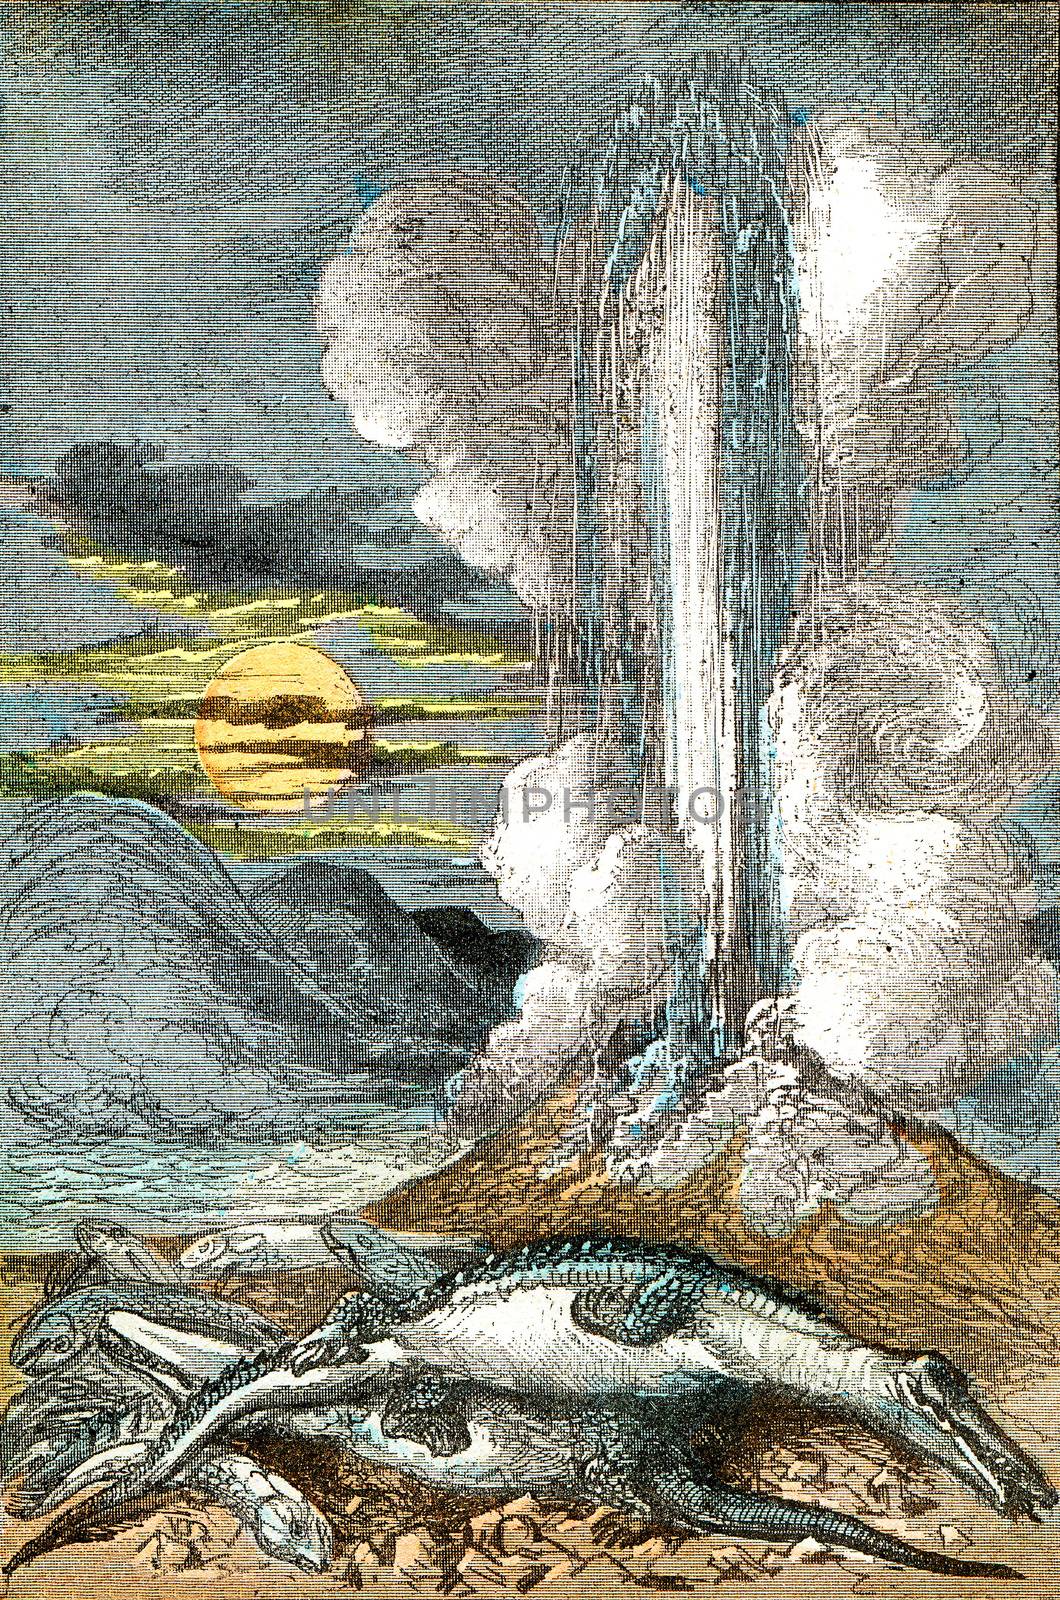 Eruptions of venereal thermal waters, at the period of the line, by Morphart